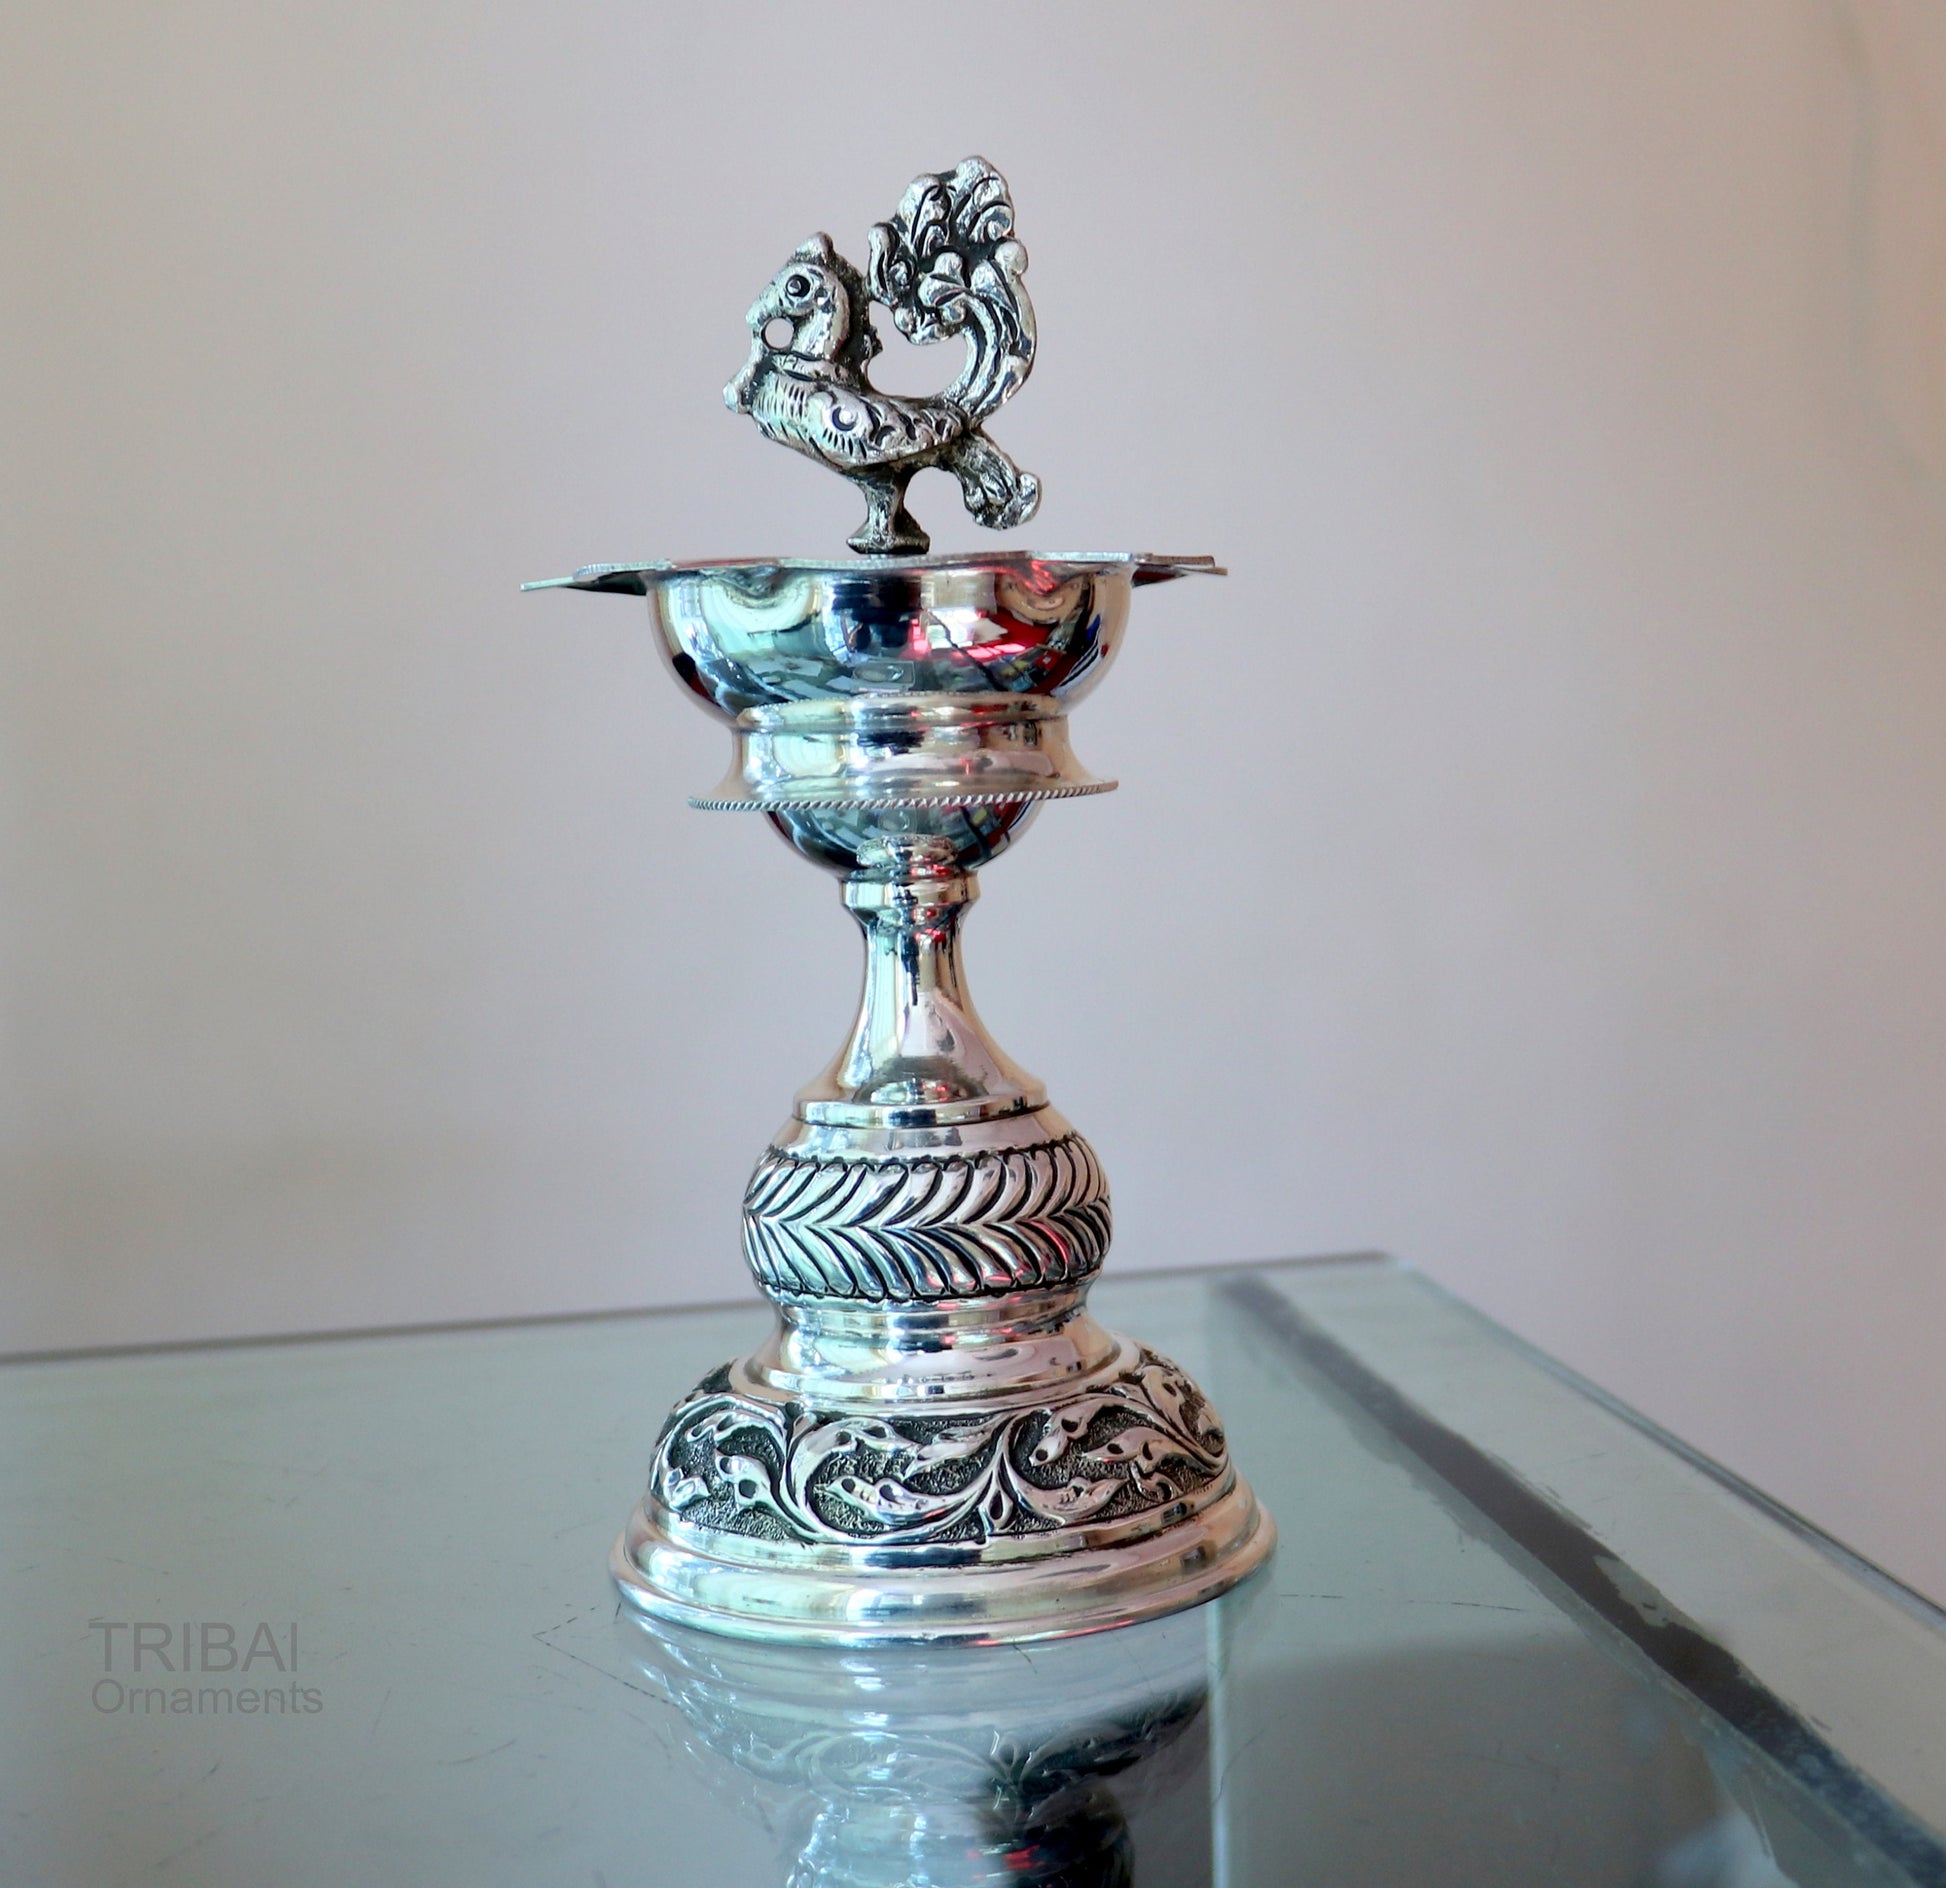 925 sterling silver handcrafted vintage work oil lamp or candle stand, silver Deepak, silver article, puja utensils, silver figurine su587 - TRIBAL ORNAMENTS